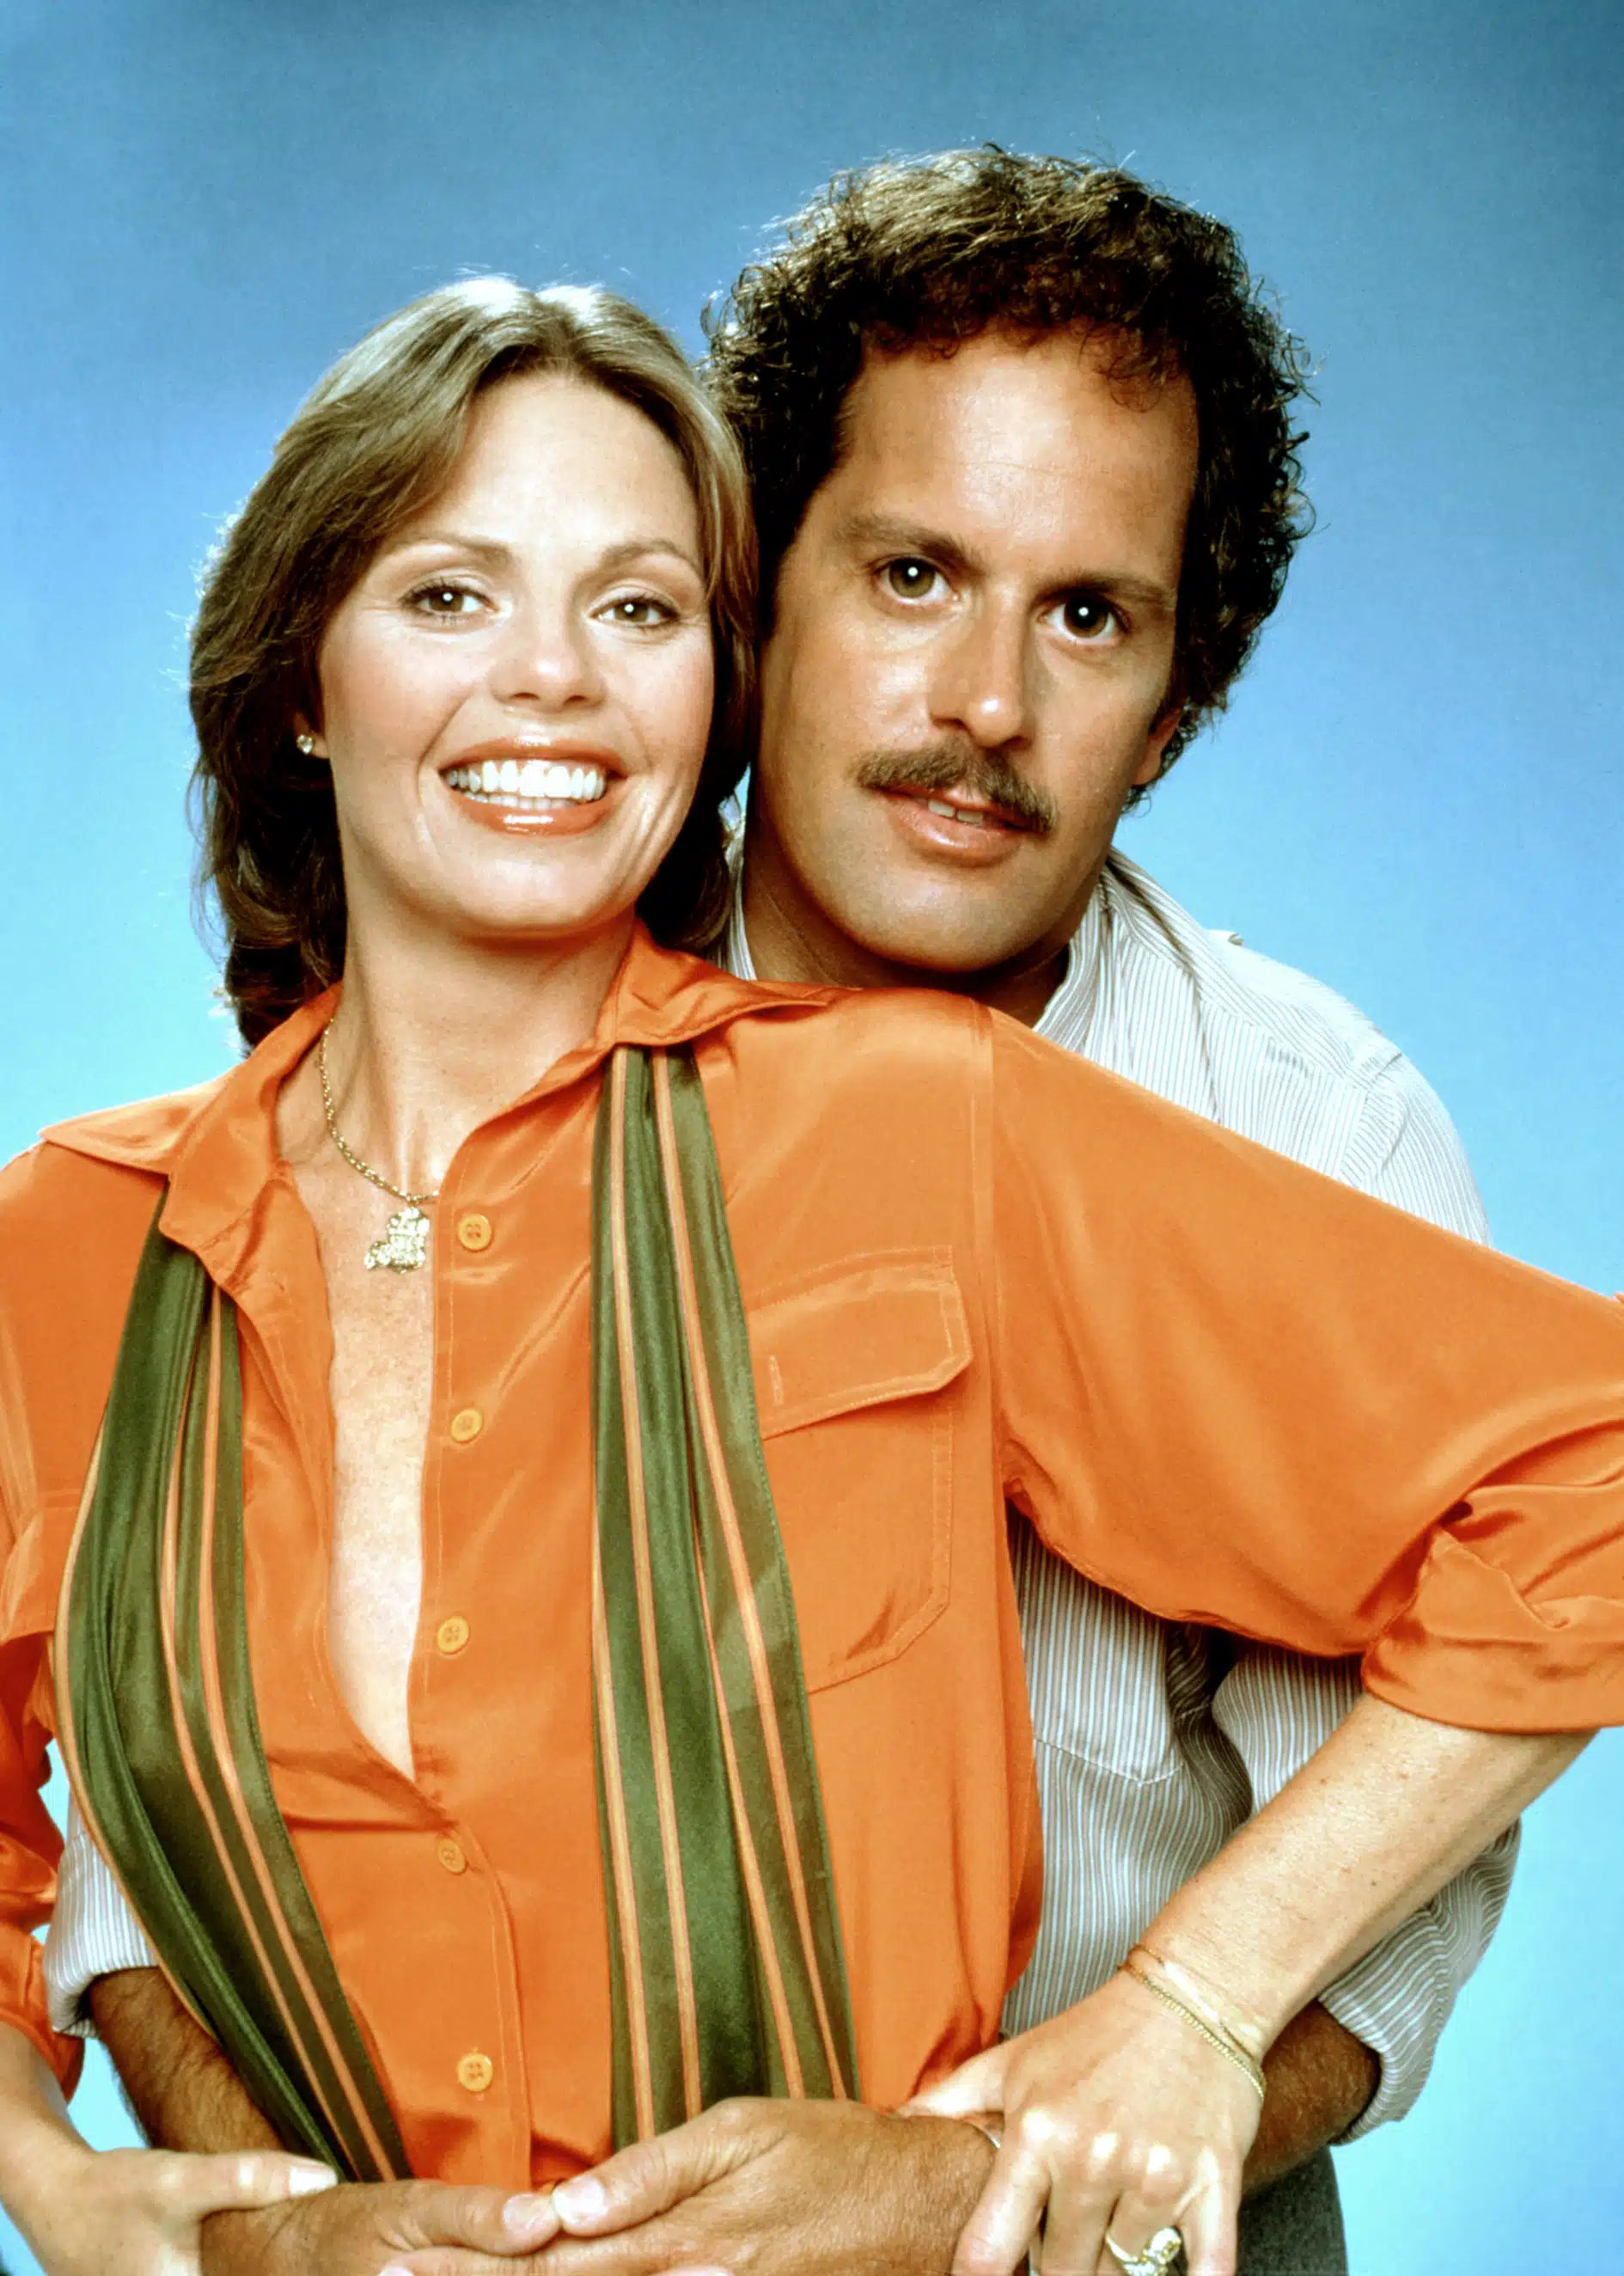 Captain and Tennille, (Toni Tennille, Daryl Dragon), ca. mid-1970s 